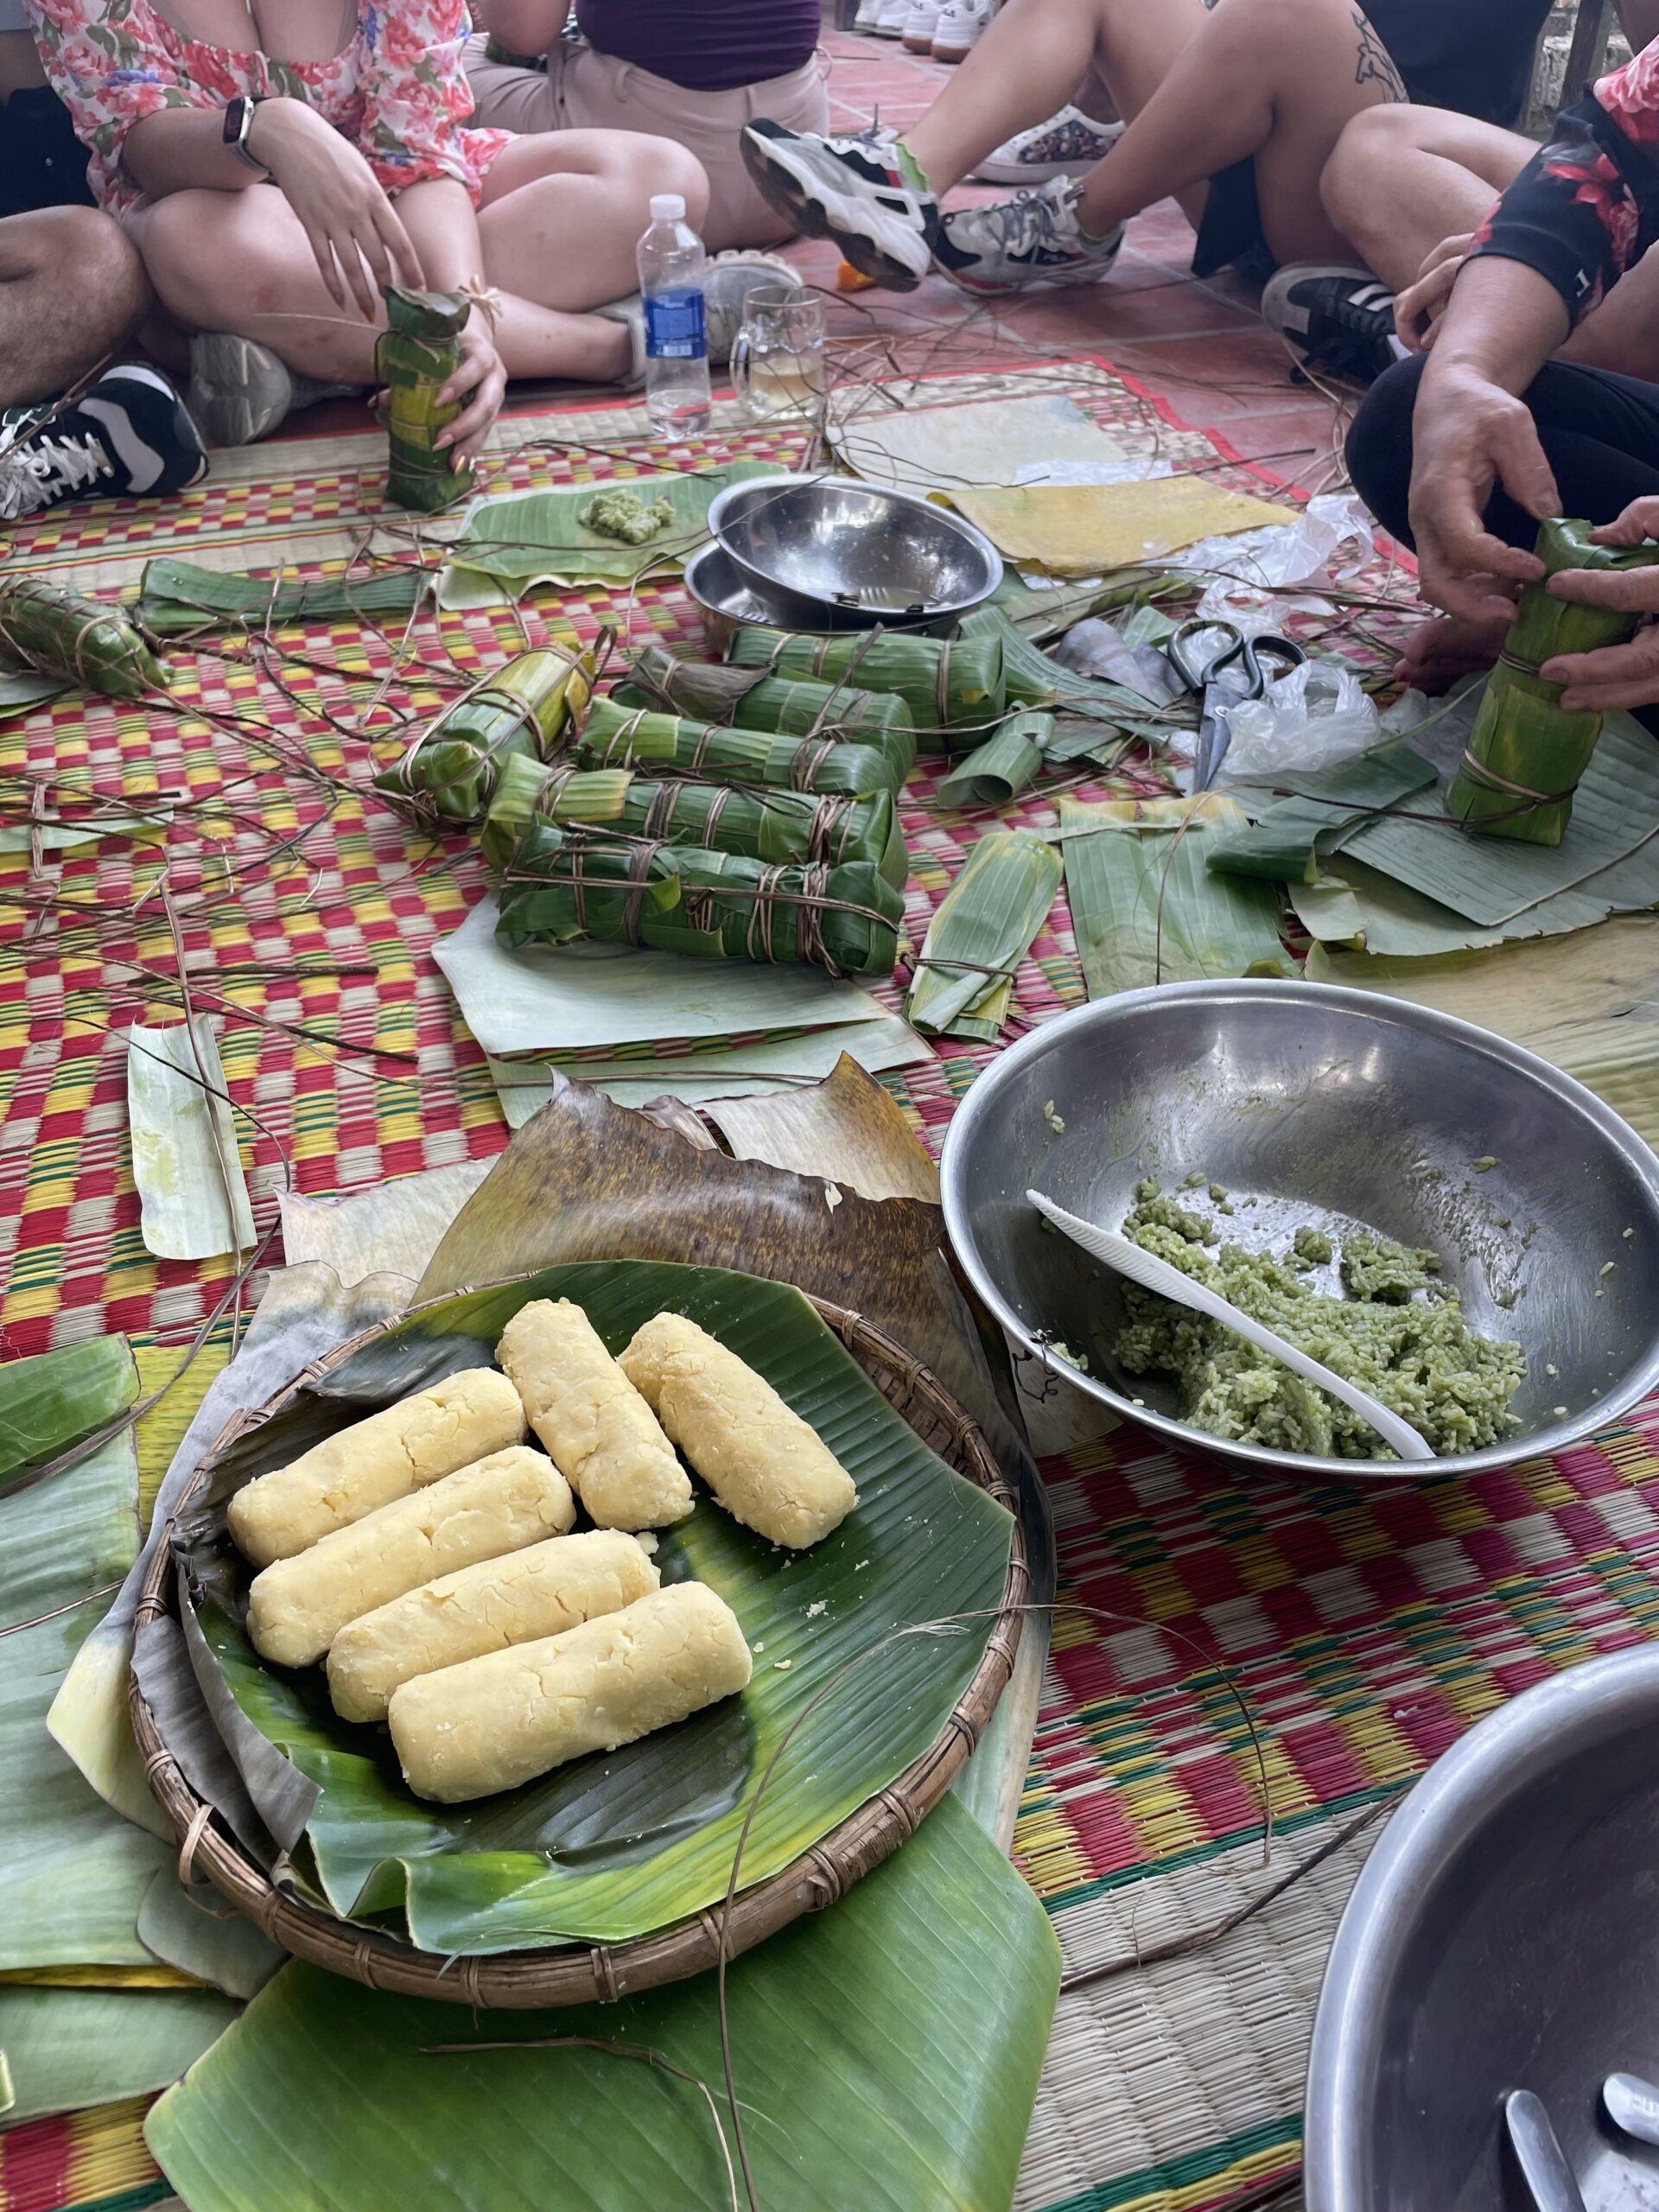 A food-making session in Vietnam.